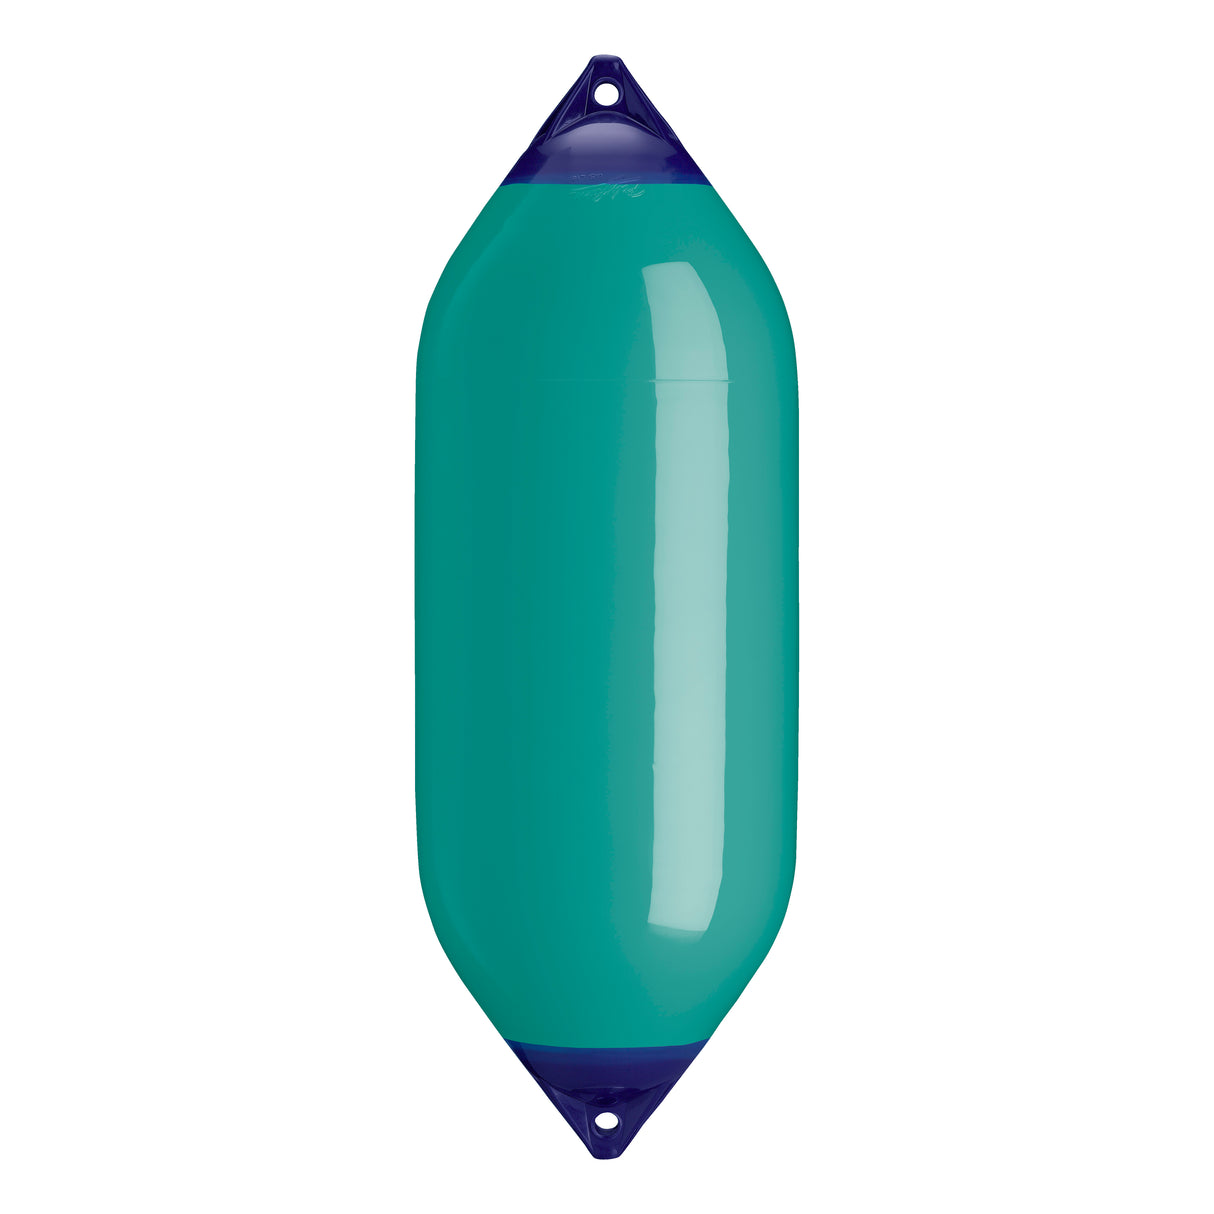 Teal boat fender with Navy-Top, Polyform F-10 